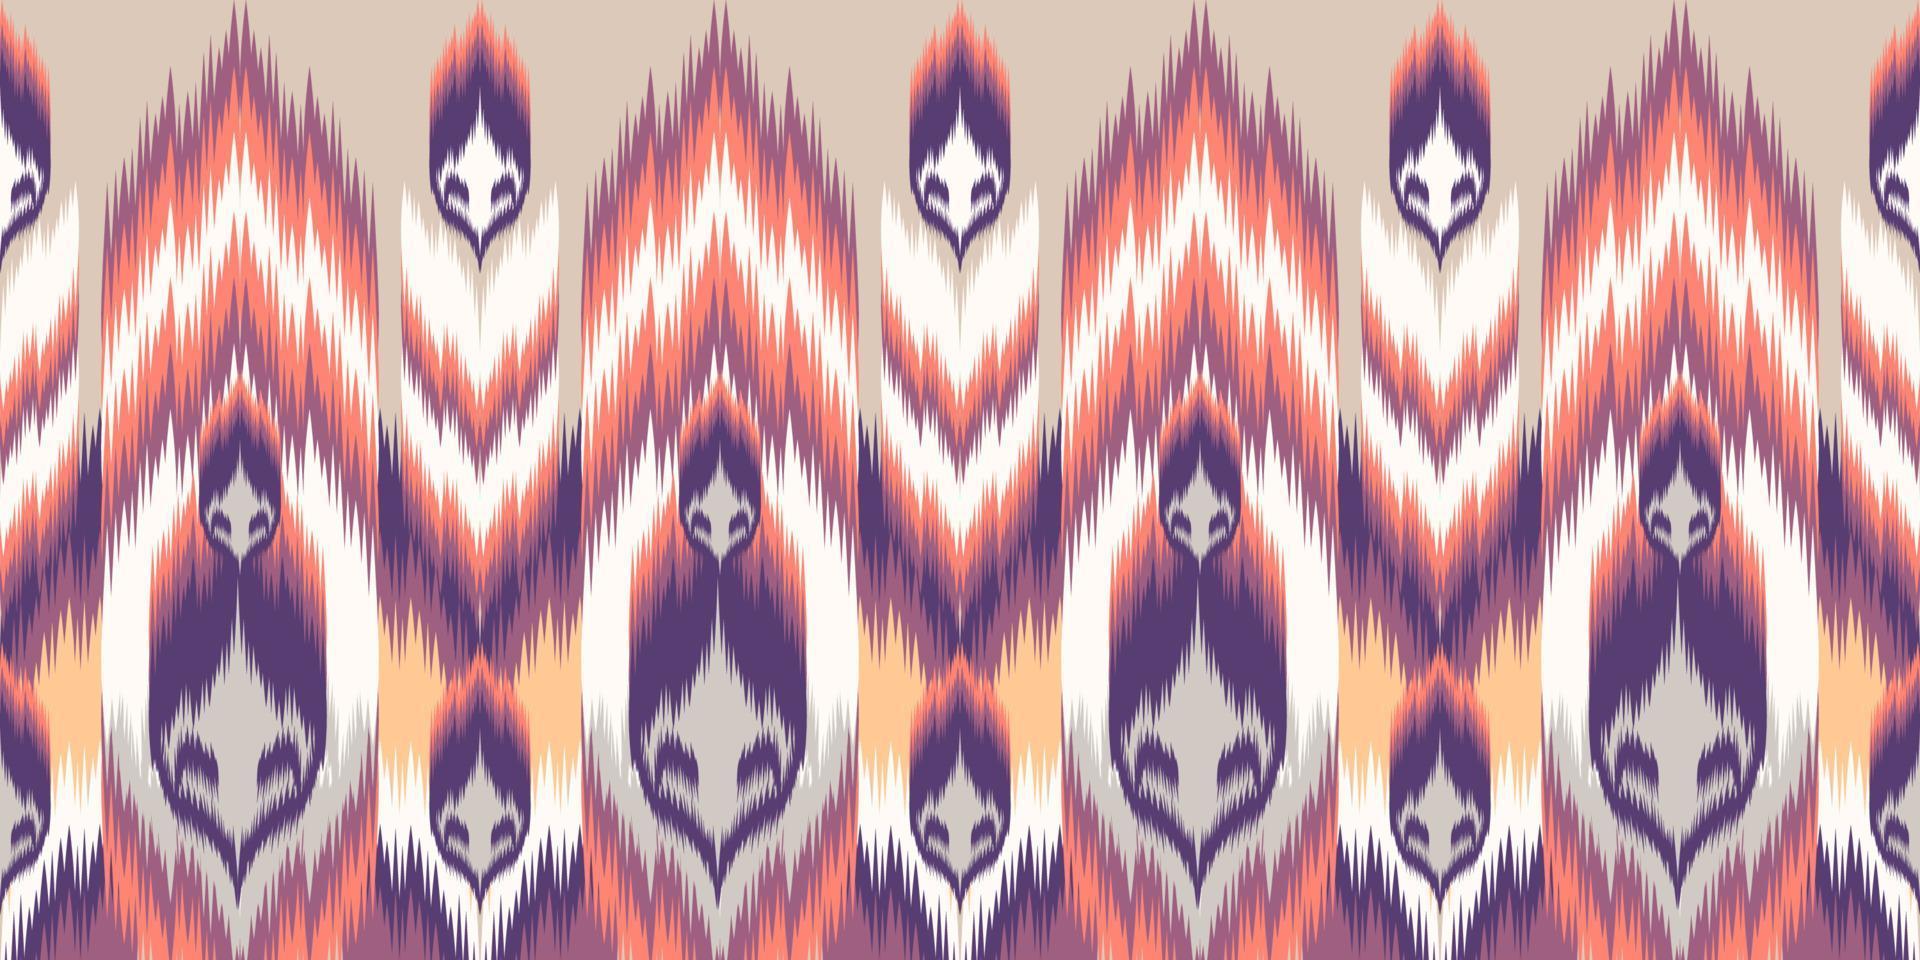 Ethnic fabric pattern Designed from geometric shapes Ethnic Asian style fabric pattern Used for home decoration, carpet work, indoor and outdoor use. vector